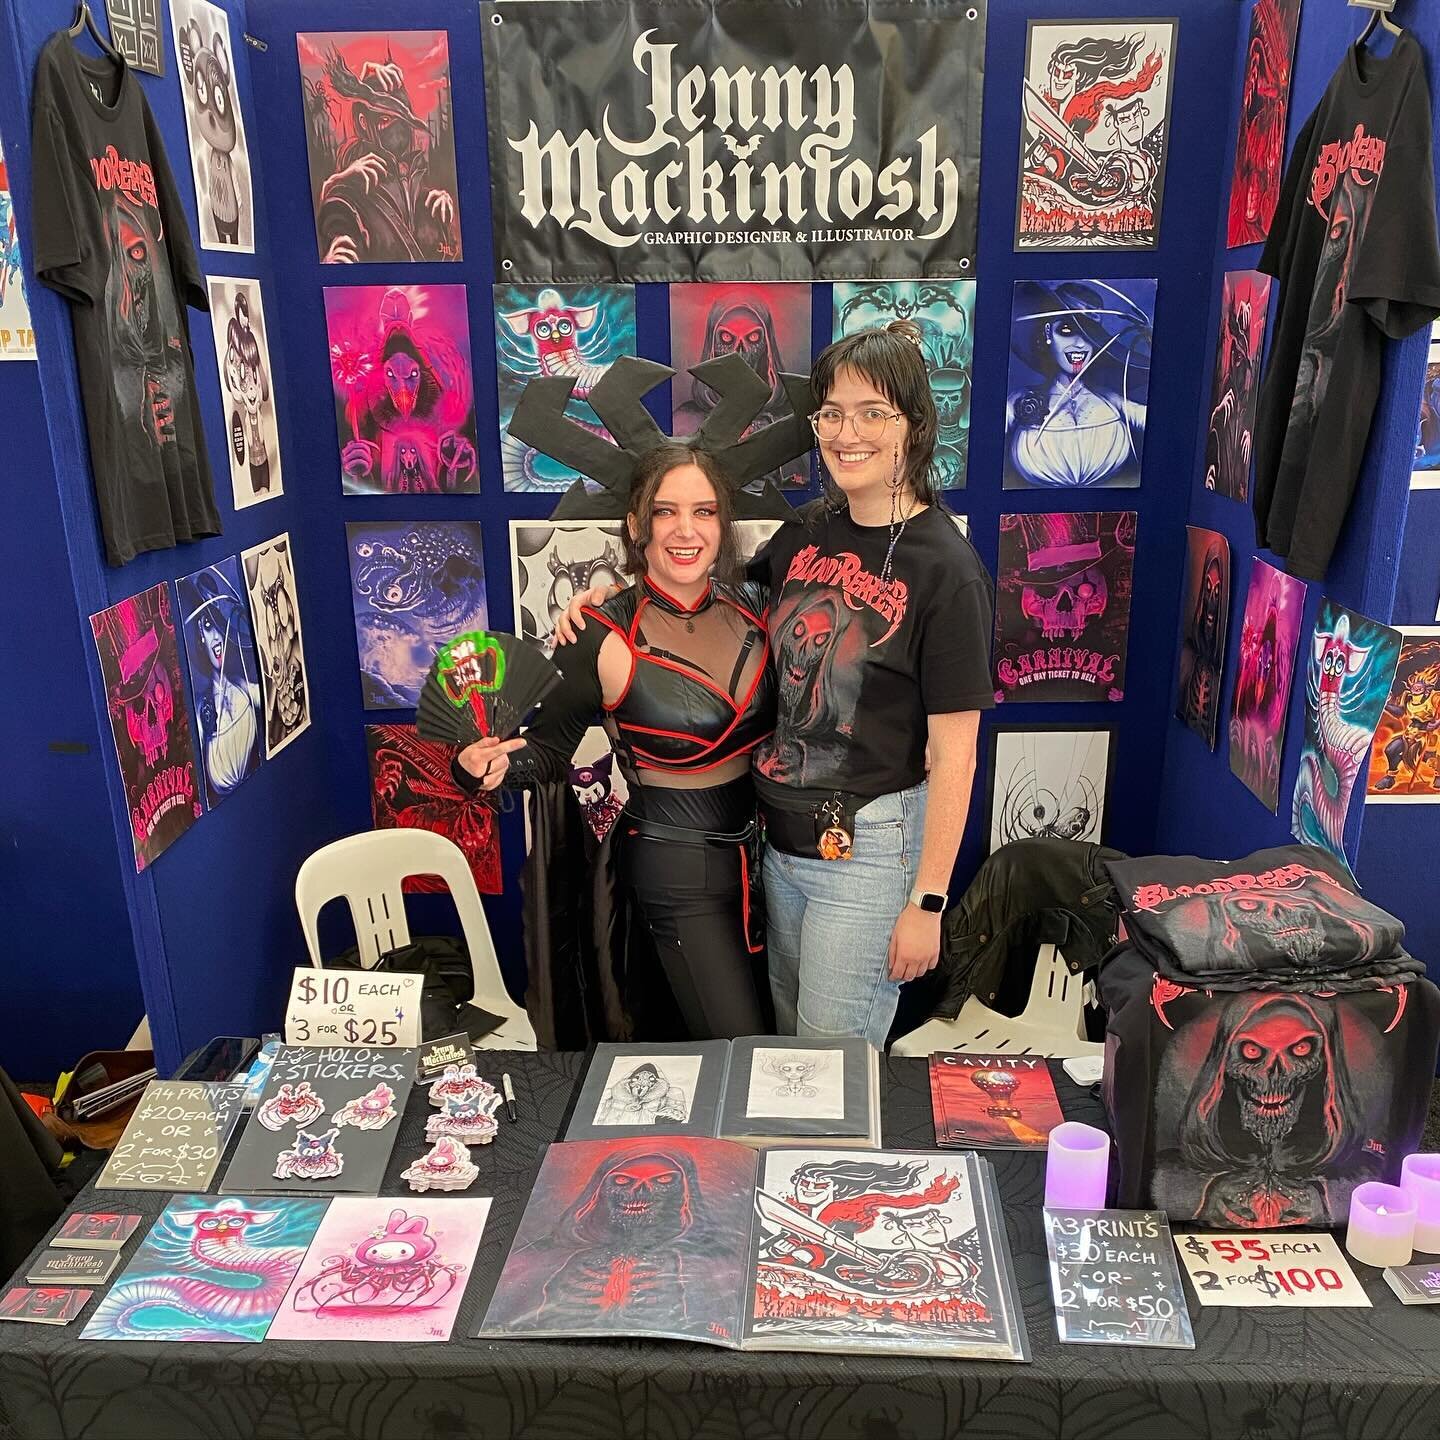 THANK YOU @supanovaexpo MELBOURNE FOR A GREAT WEEKEND!!

We had such a fun time meeting and chatting with you all throughout the event 😄 I&rsquo;d also like to say thank you to my wonderful booth babe and friend @silverstasia for flying interstate a